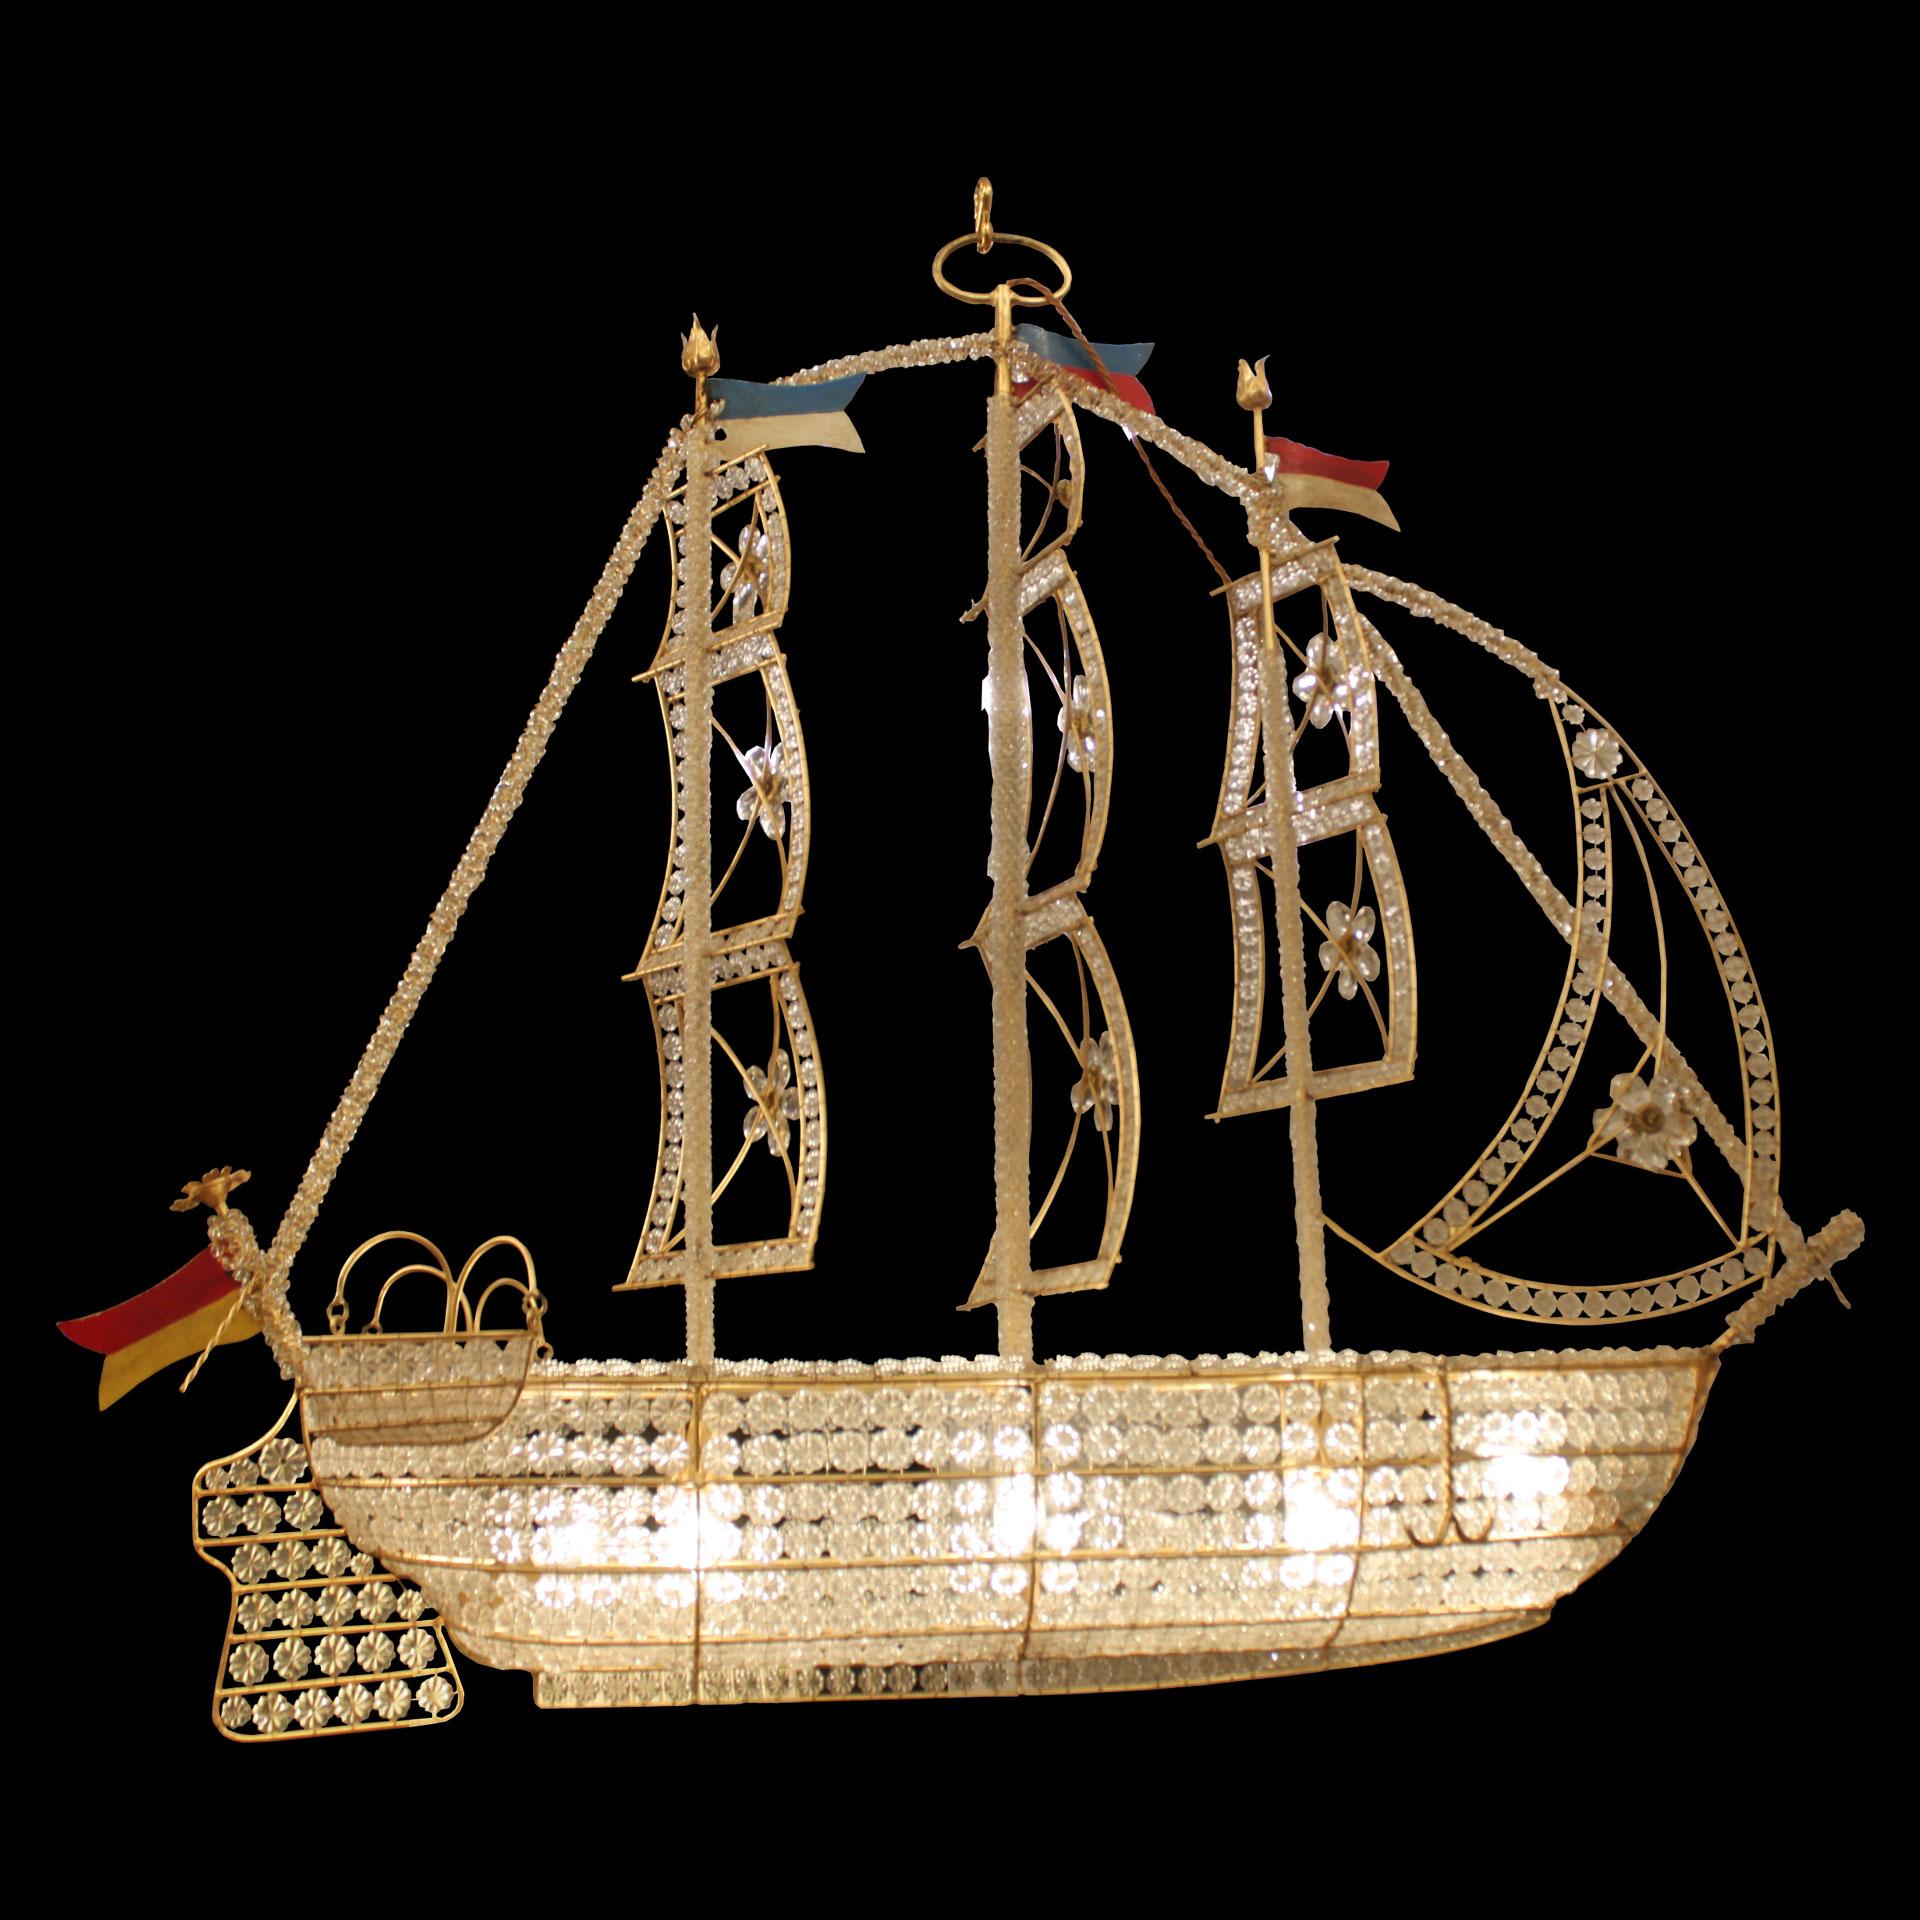 French exceptional ship chandelier in excellent condition and equipped with five lights. It has nine sails and two rescue boats hanging at the rear, four painted standards. The body hull is made of elegant glass flowers and small bids. the look of